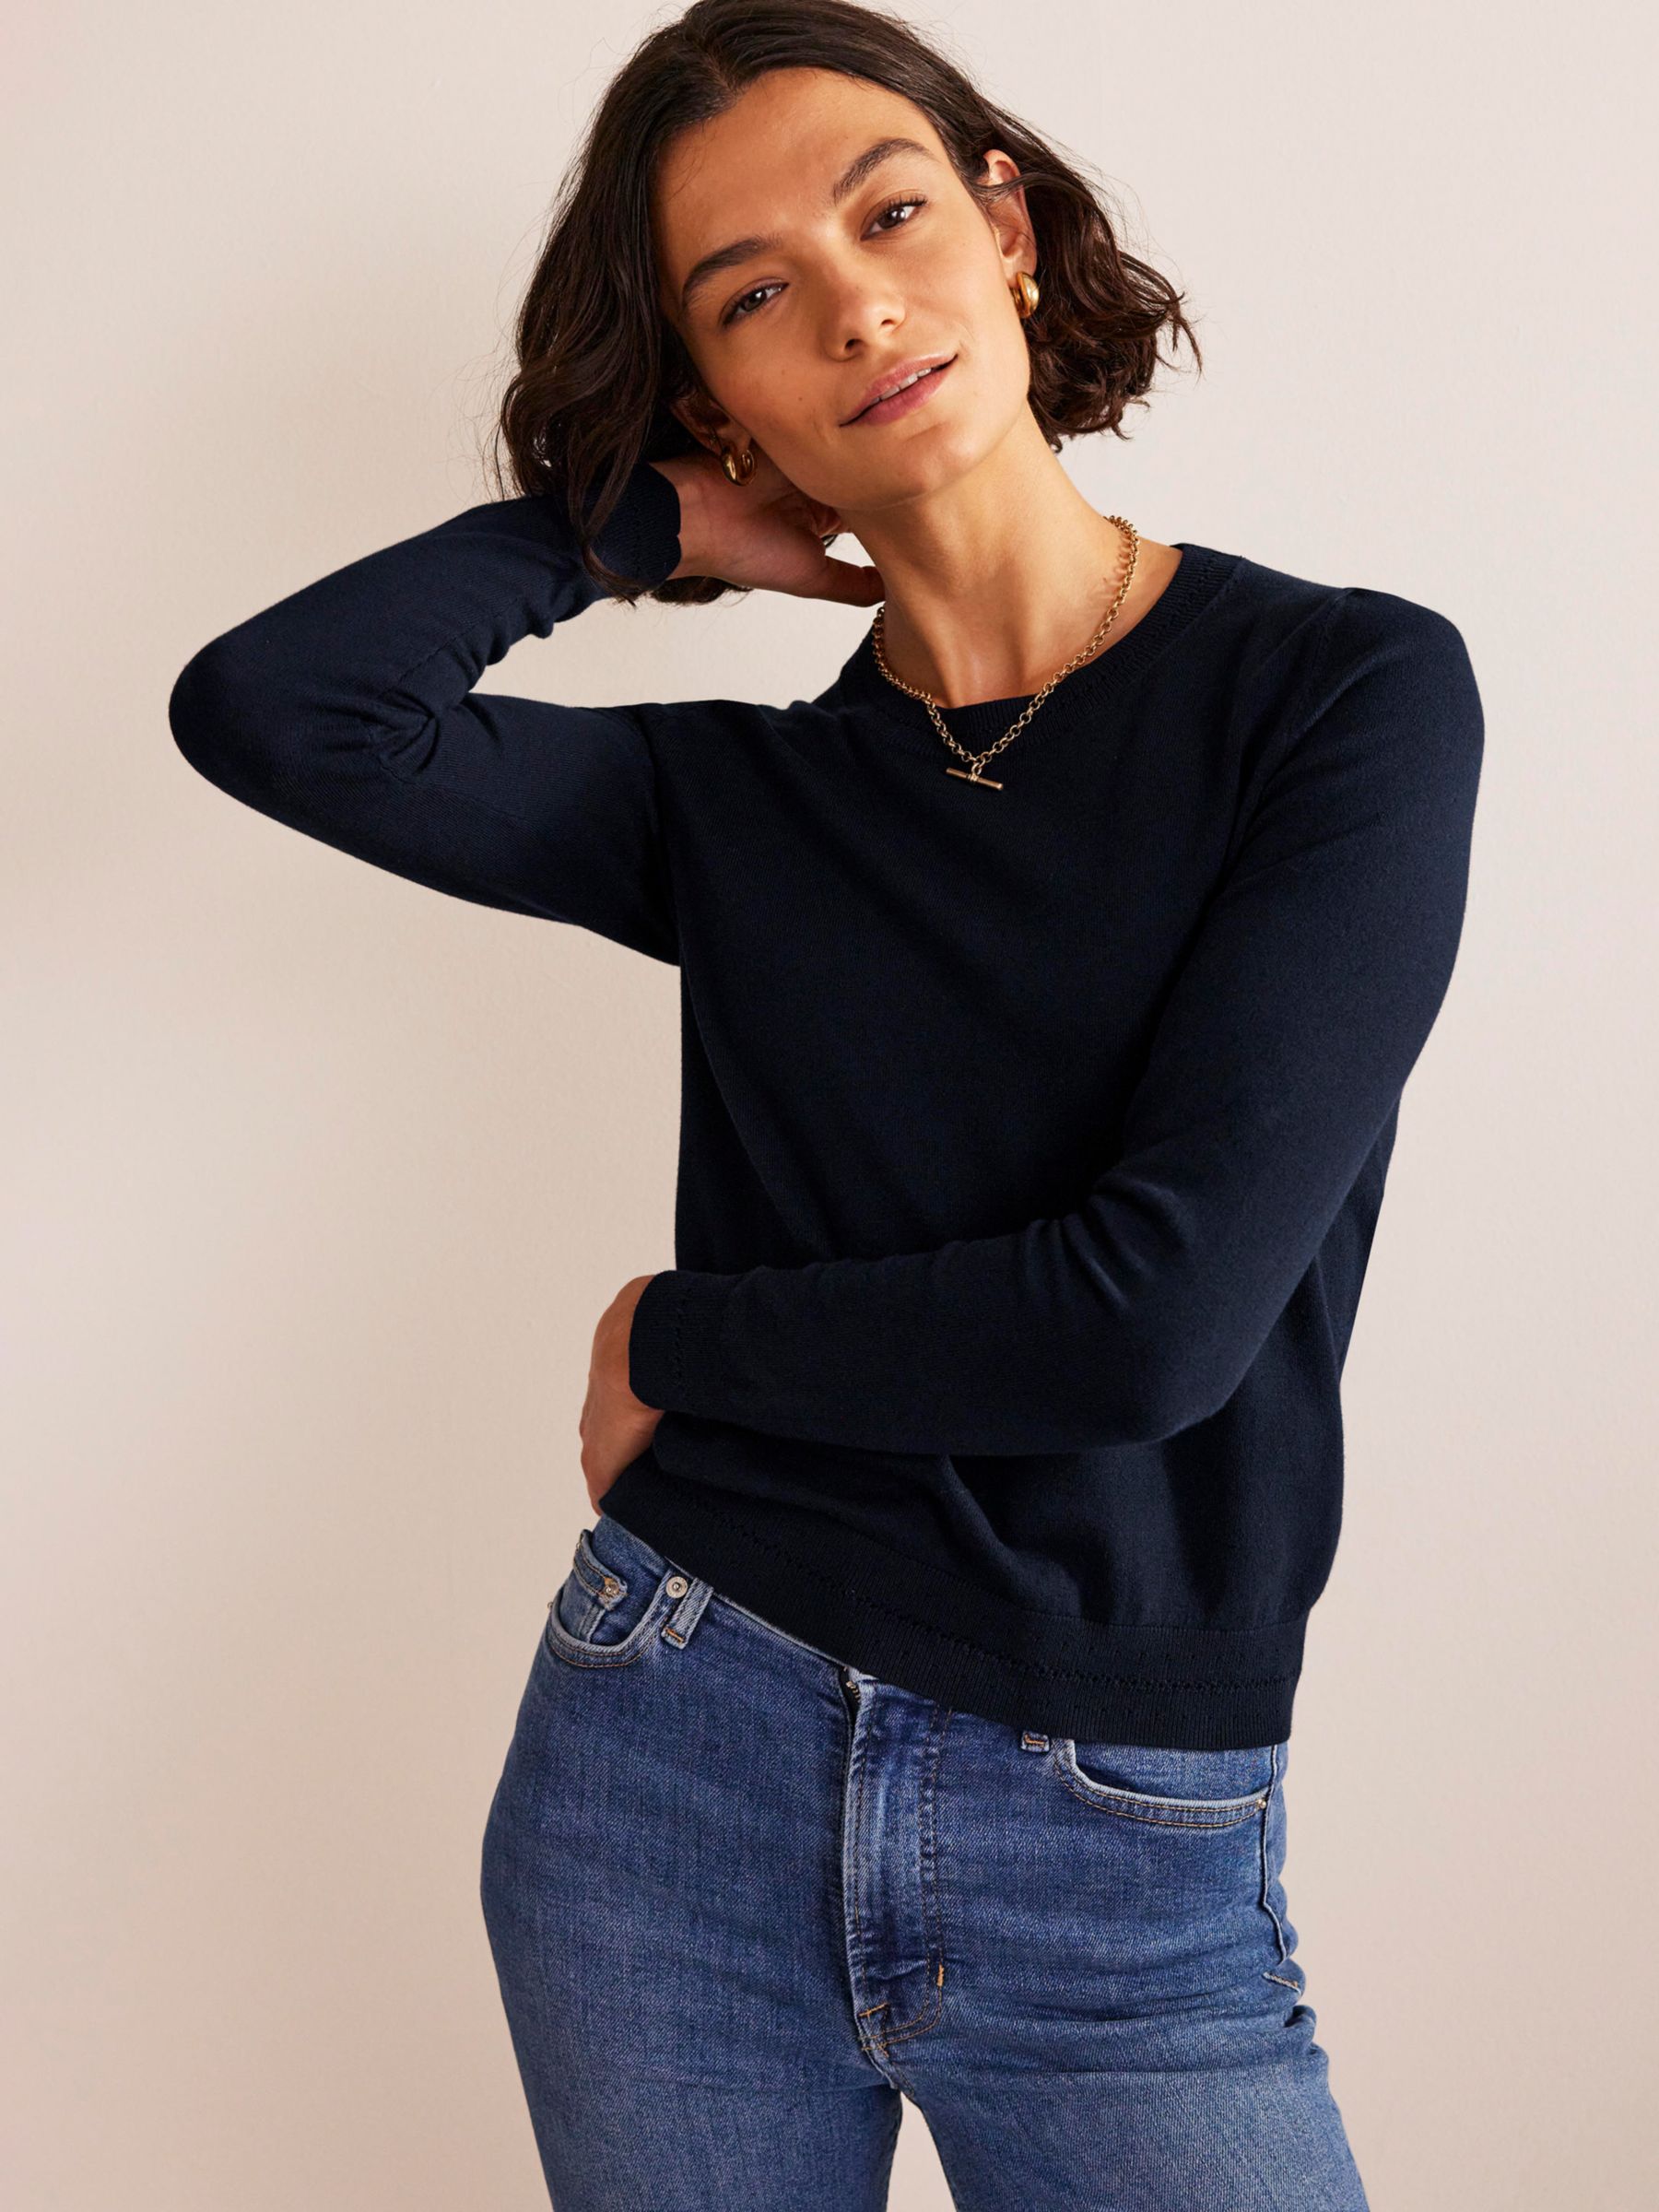 Boden Catriona Cotton Crew Neck Jumper, Navy at John Lewis & Partners